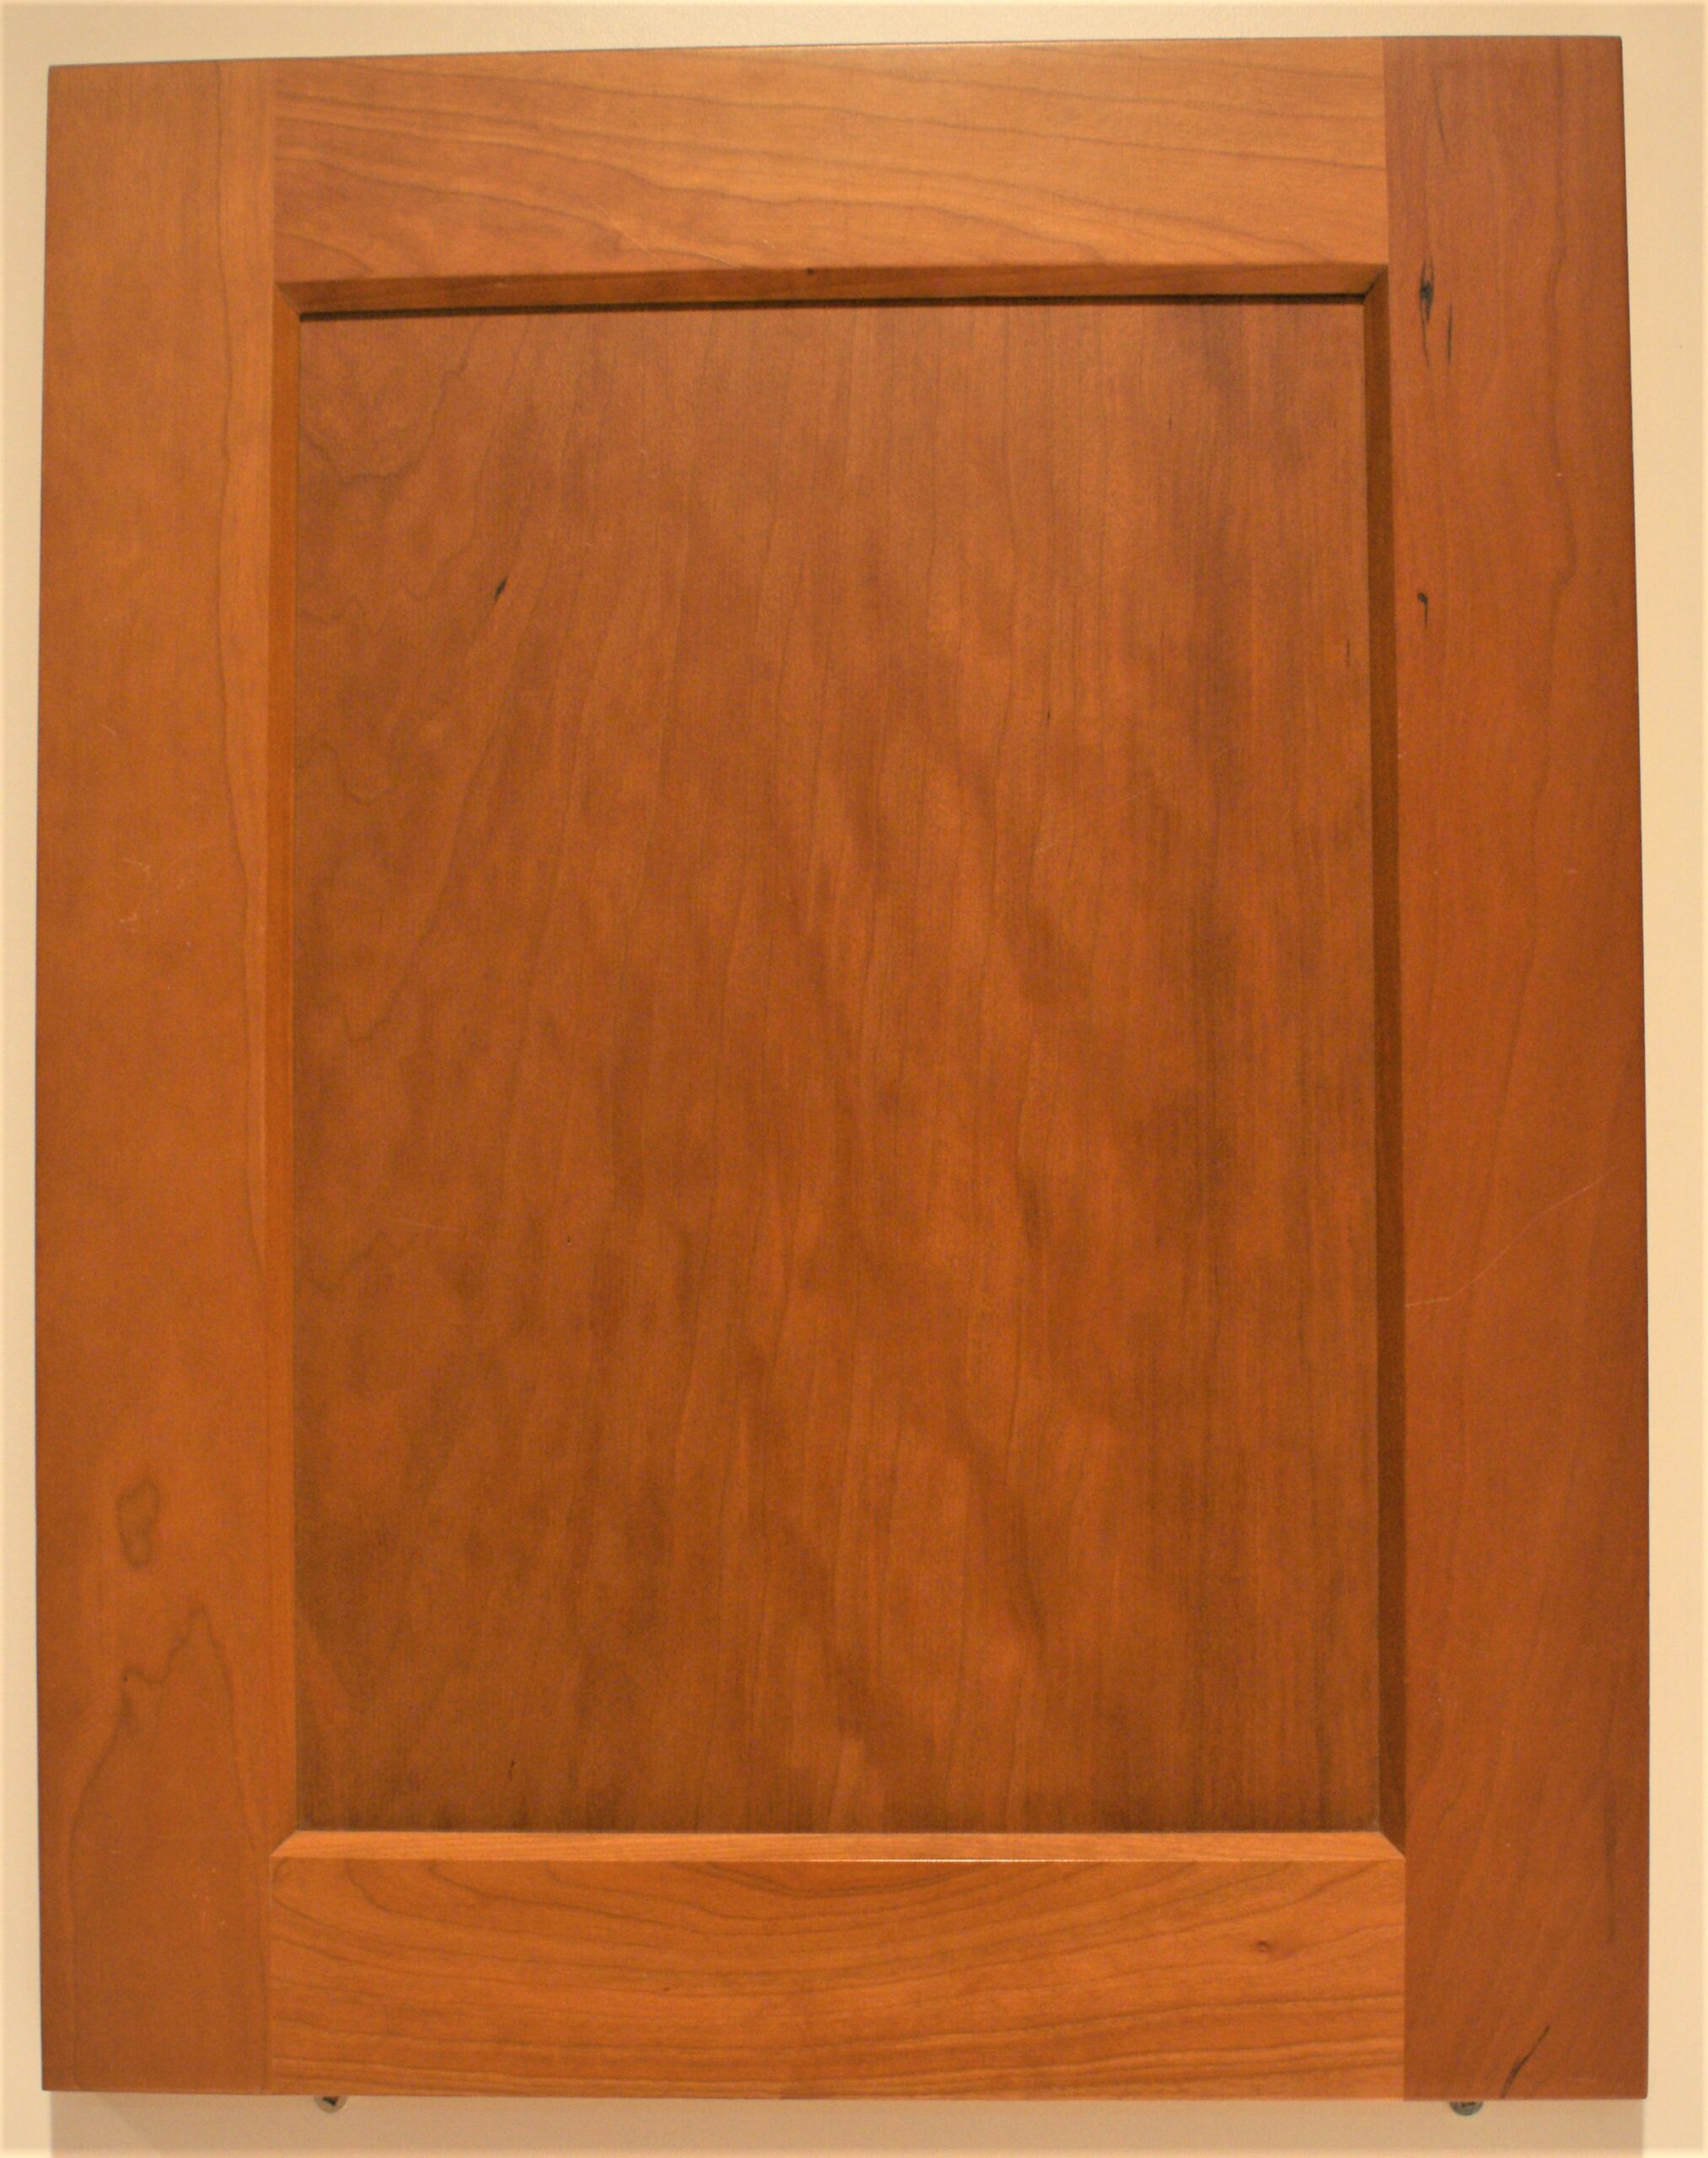 Cabinet Door Styles 101: Shaker, Raised Panels, and More – Vevano